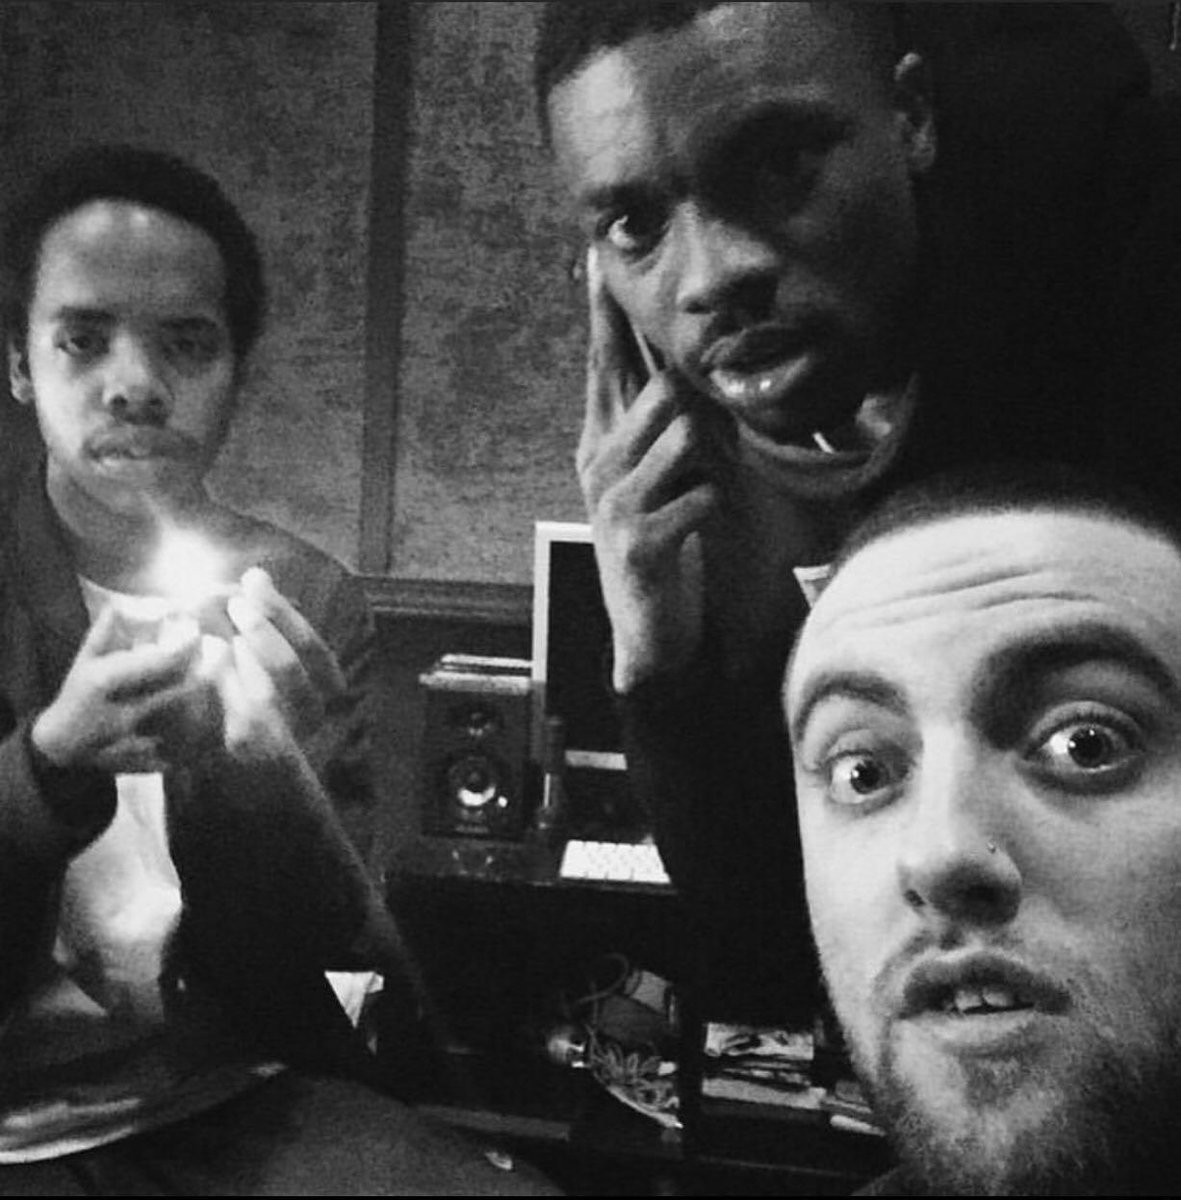 Vince Staples was introduced to Mac Miller by Earl Sweatshirt. Vince & Mac agreed to do an EP, but their chemistry was so natural that they completed a full project, Stolen Youth.